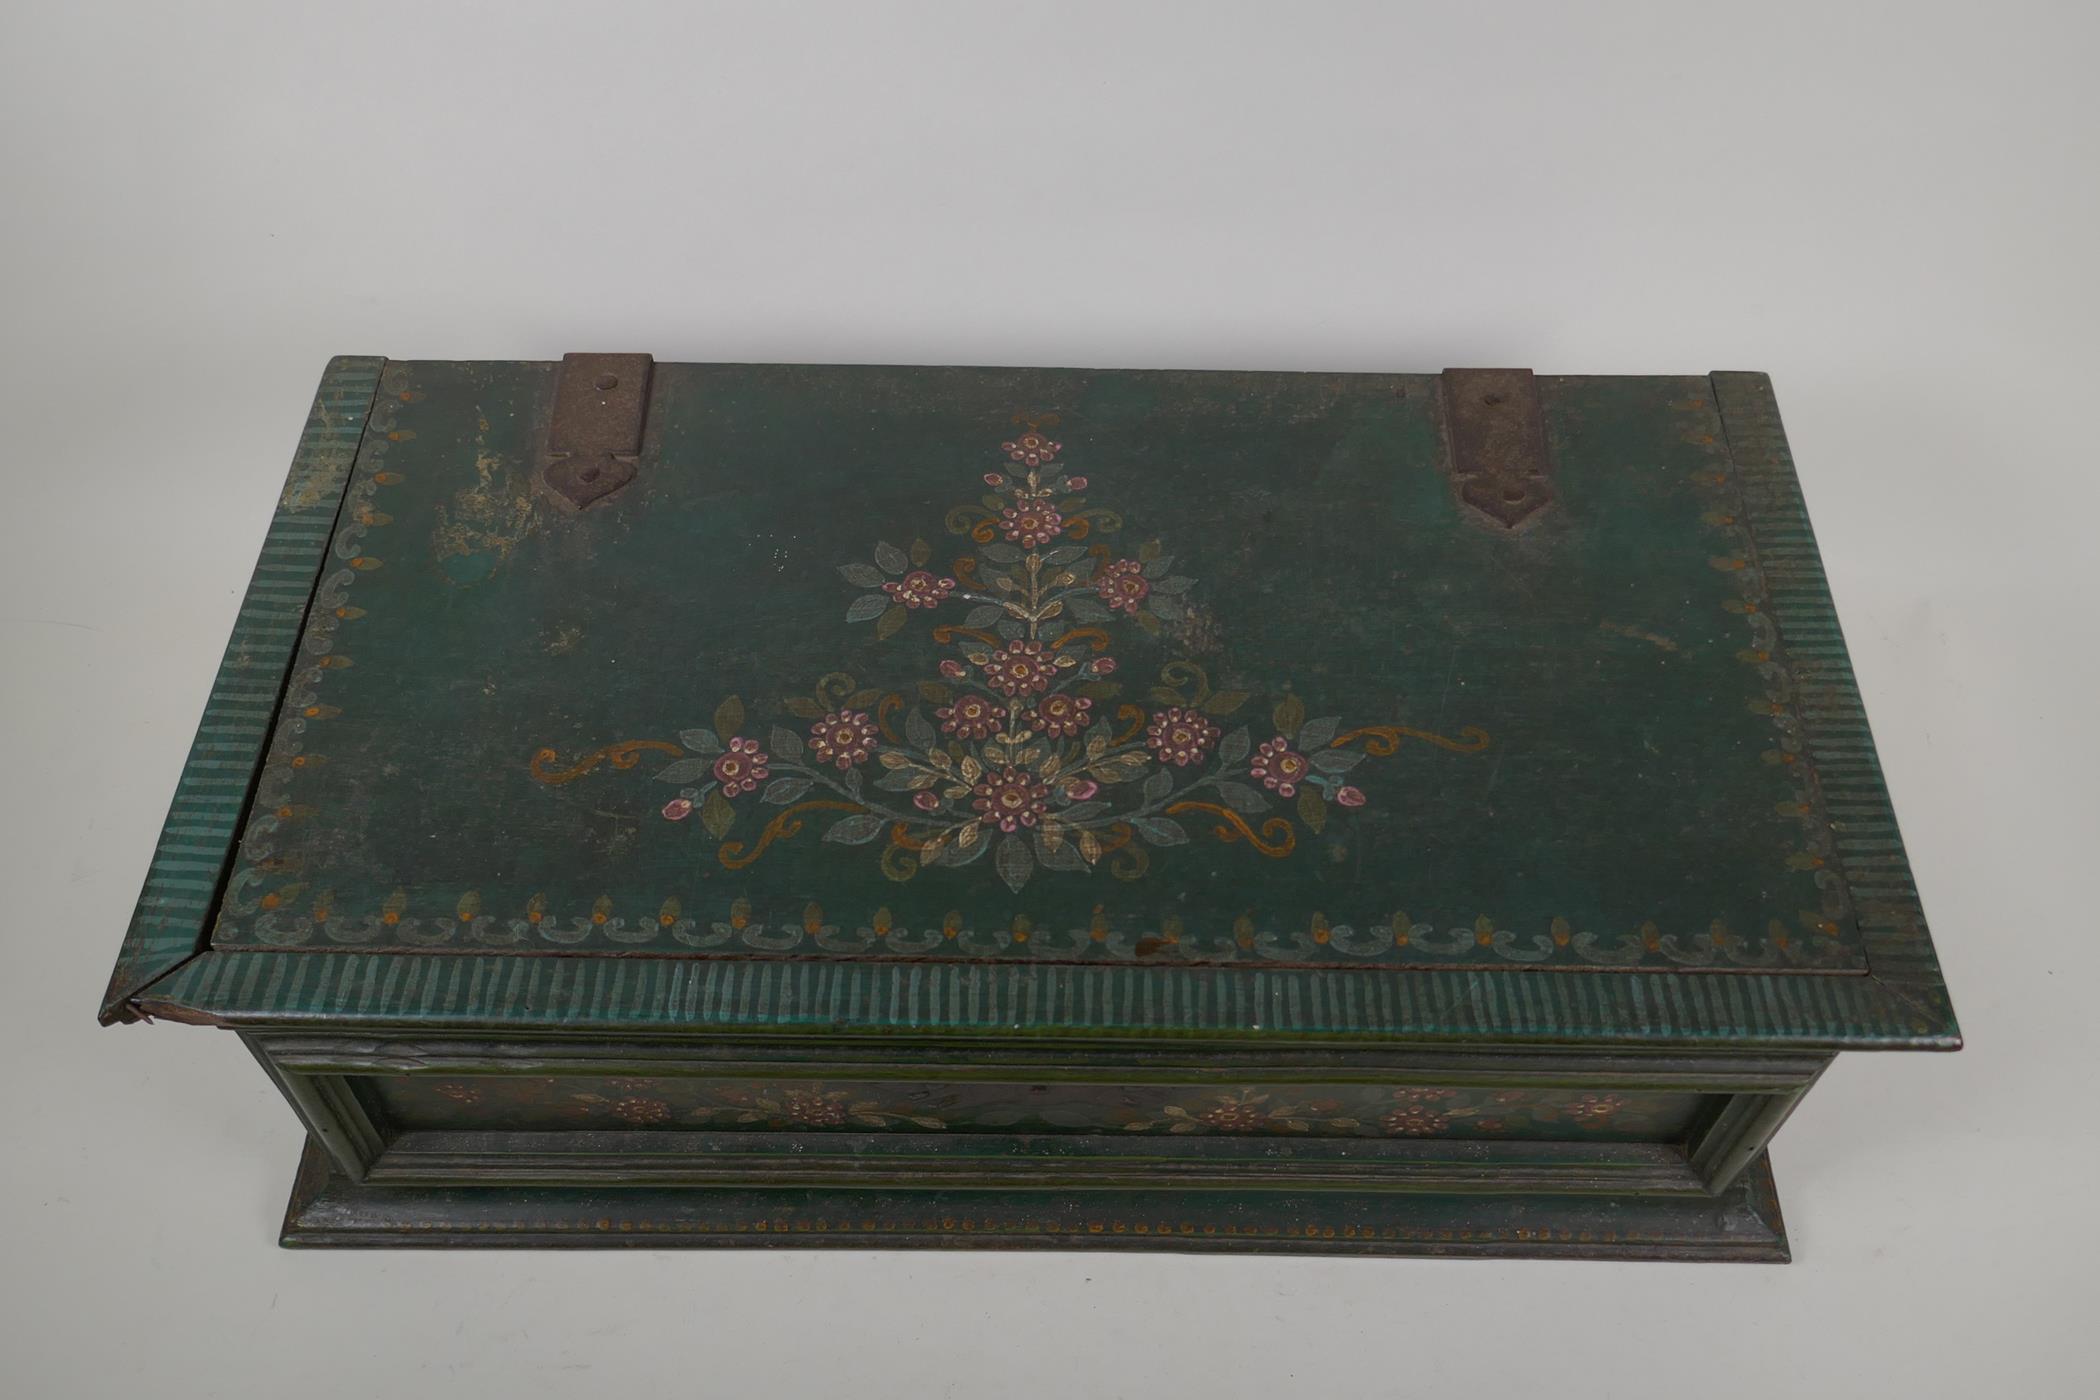 A C19th continental painted hardwood chest, 22" x 11", 7" high - Image 2 of 4